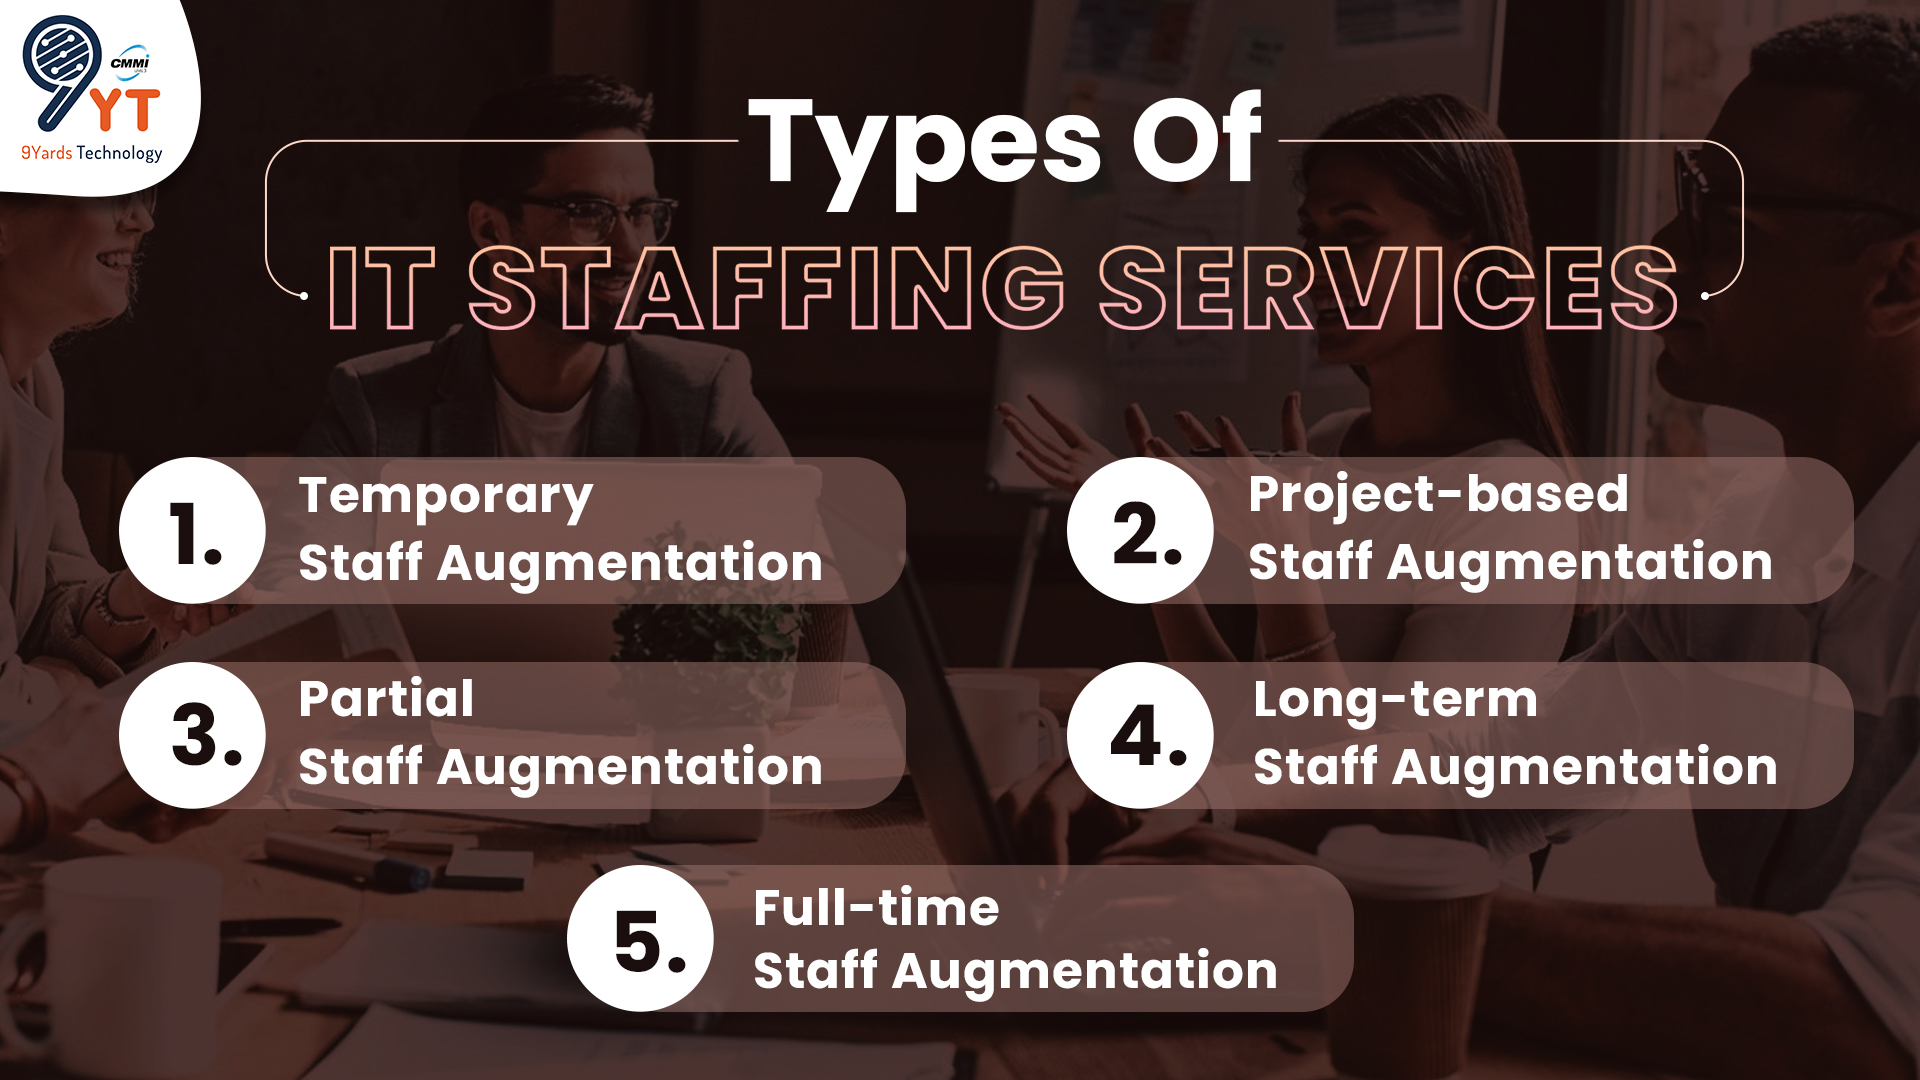 Types of IT Staffing Services